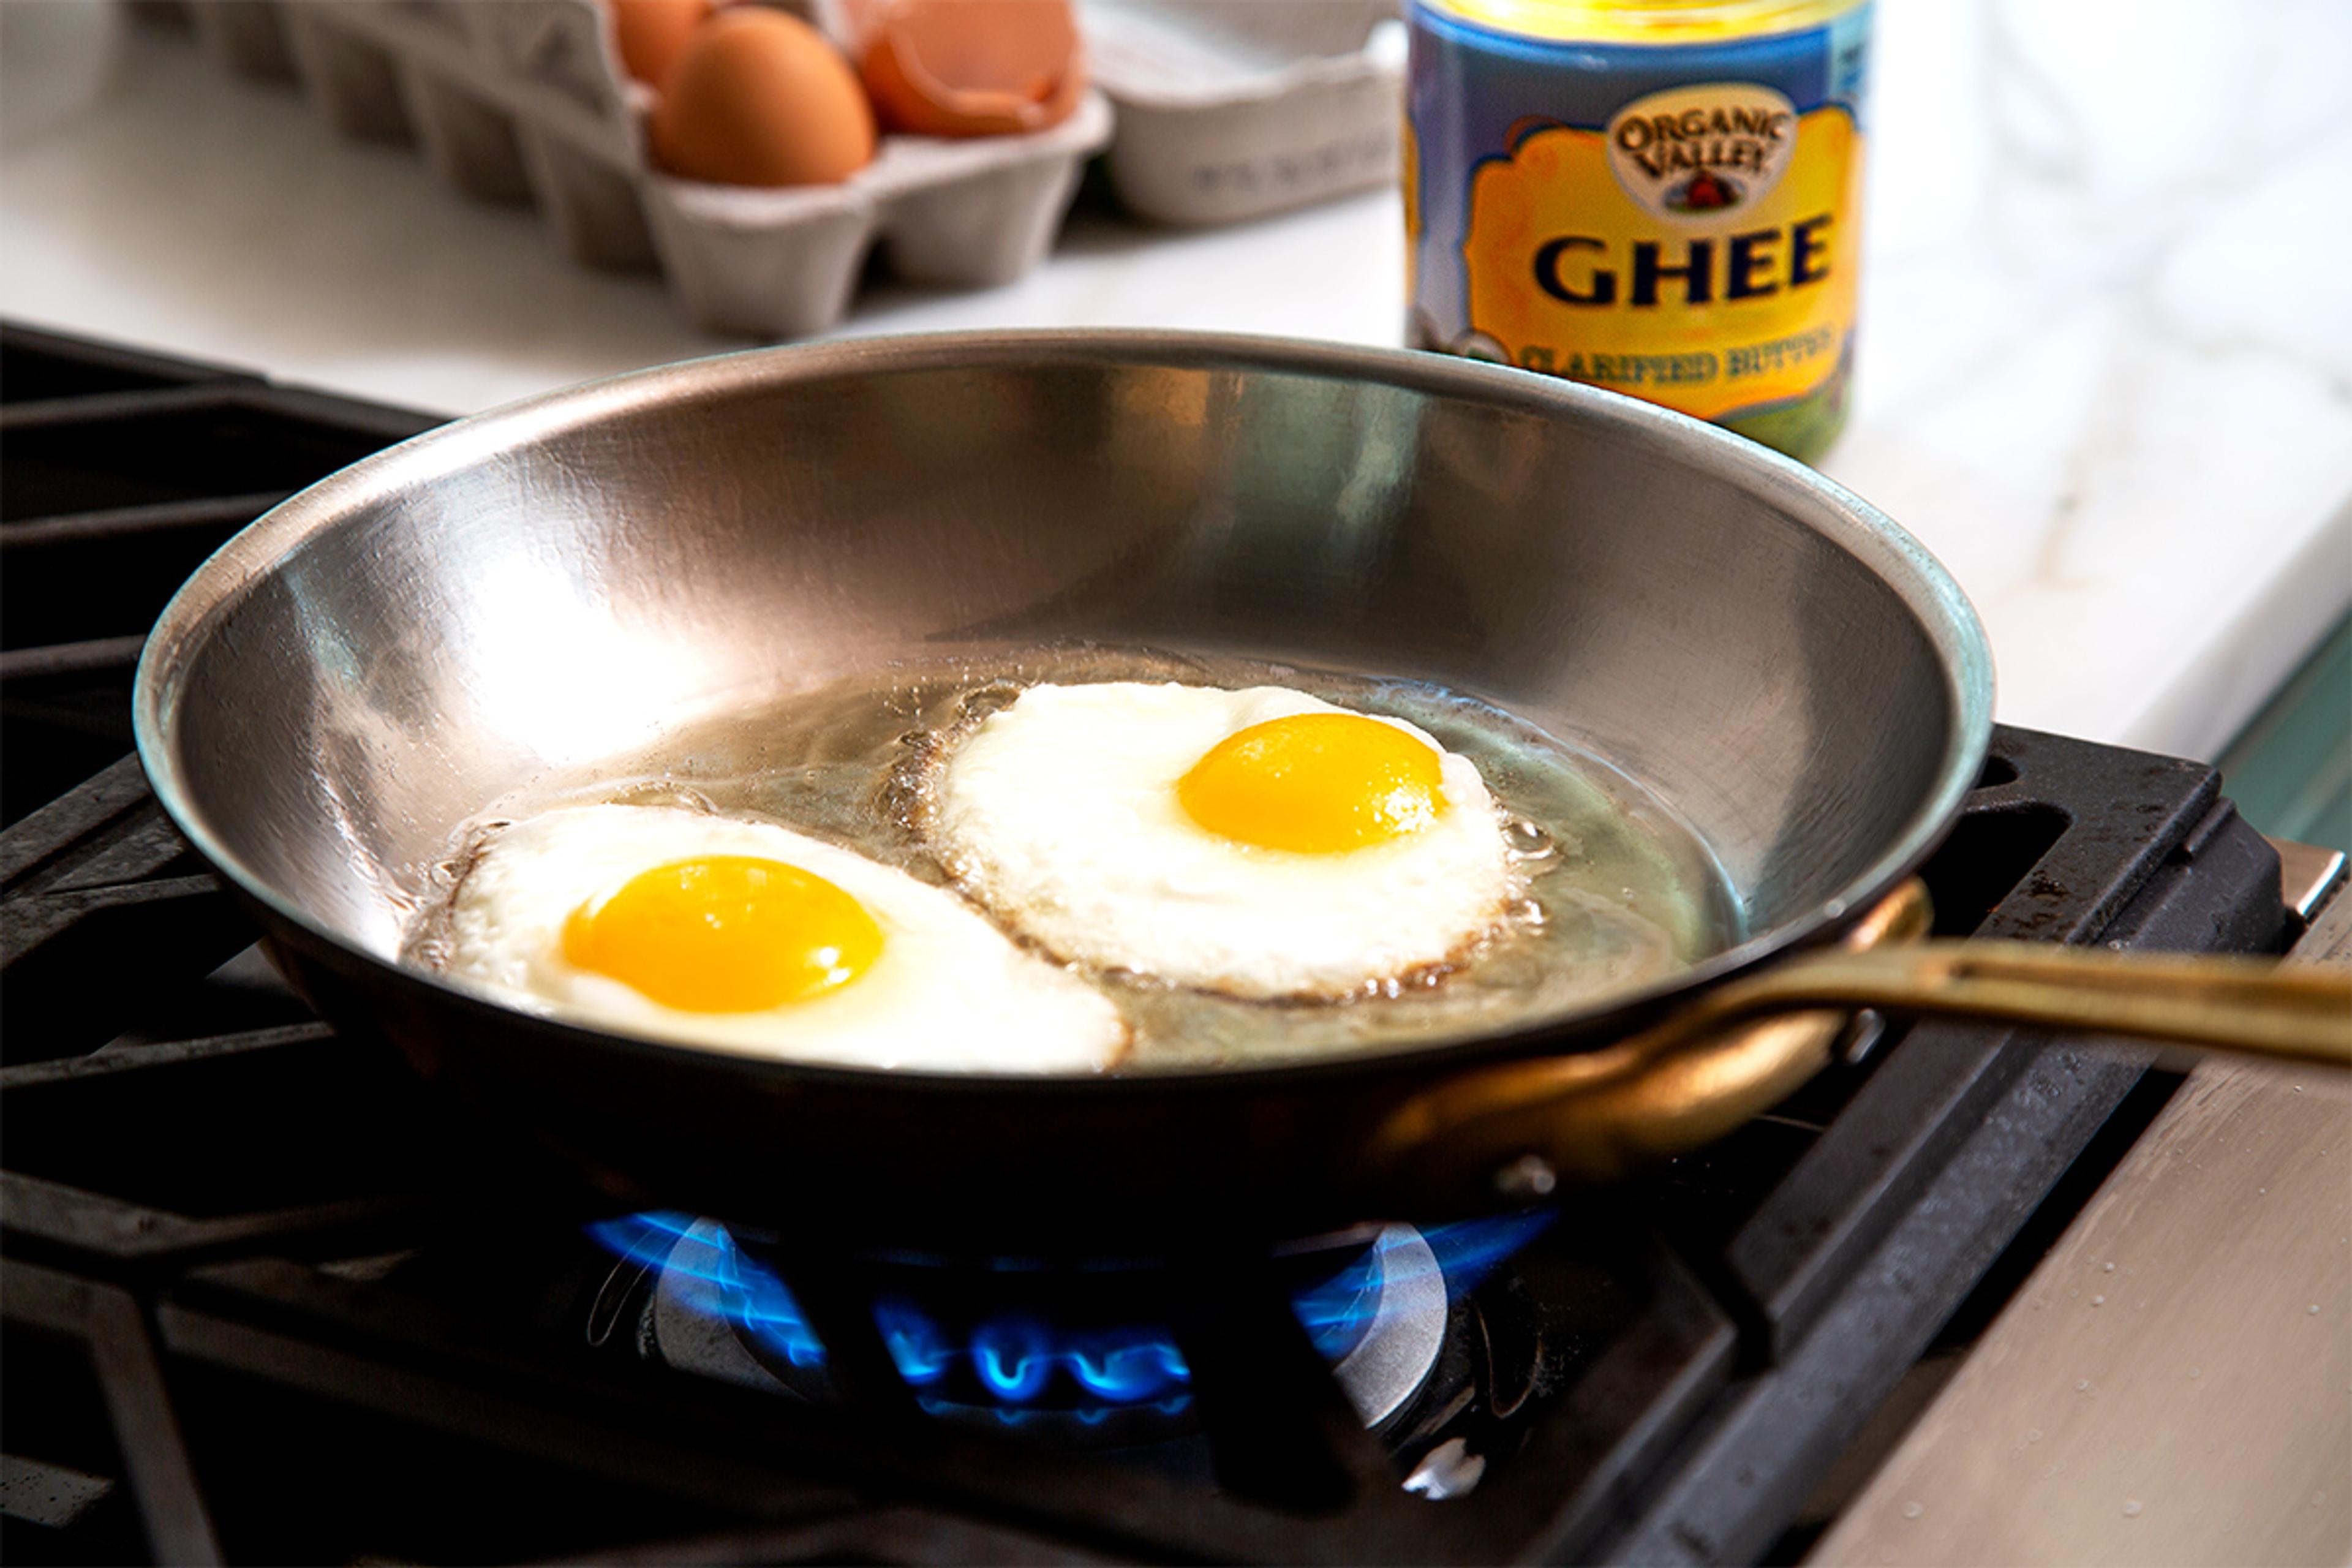 Two fried eggs sizzle in a pan with Organic Valley ghee.